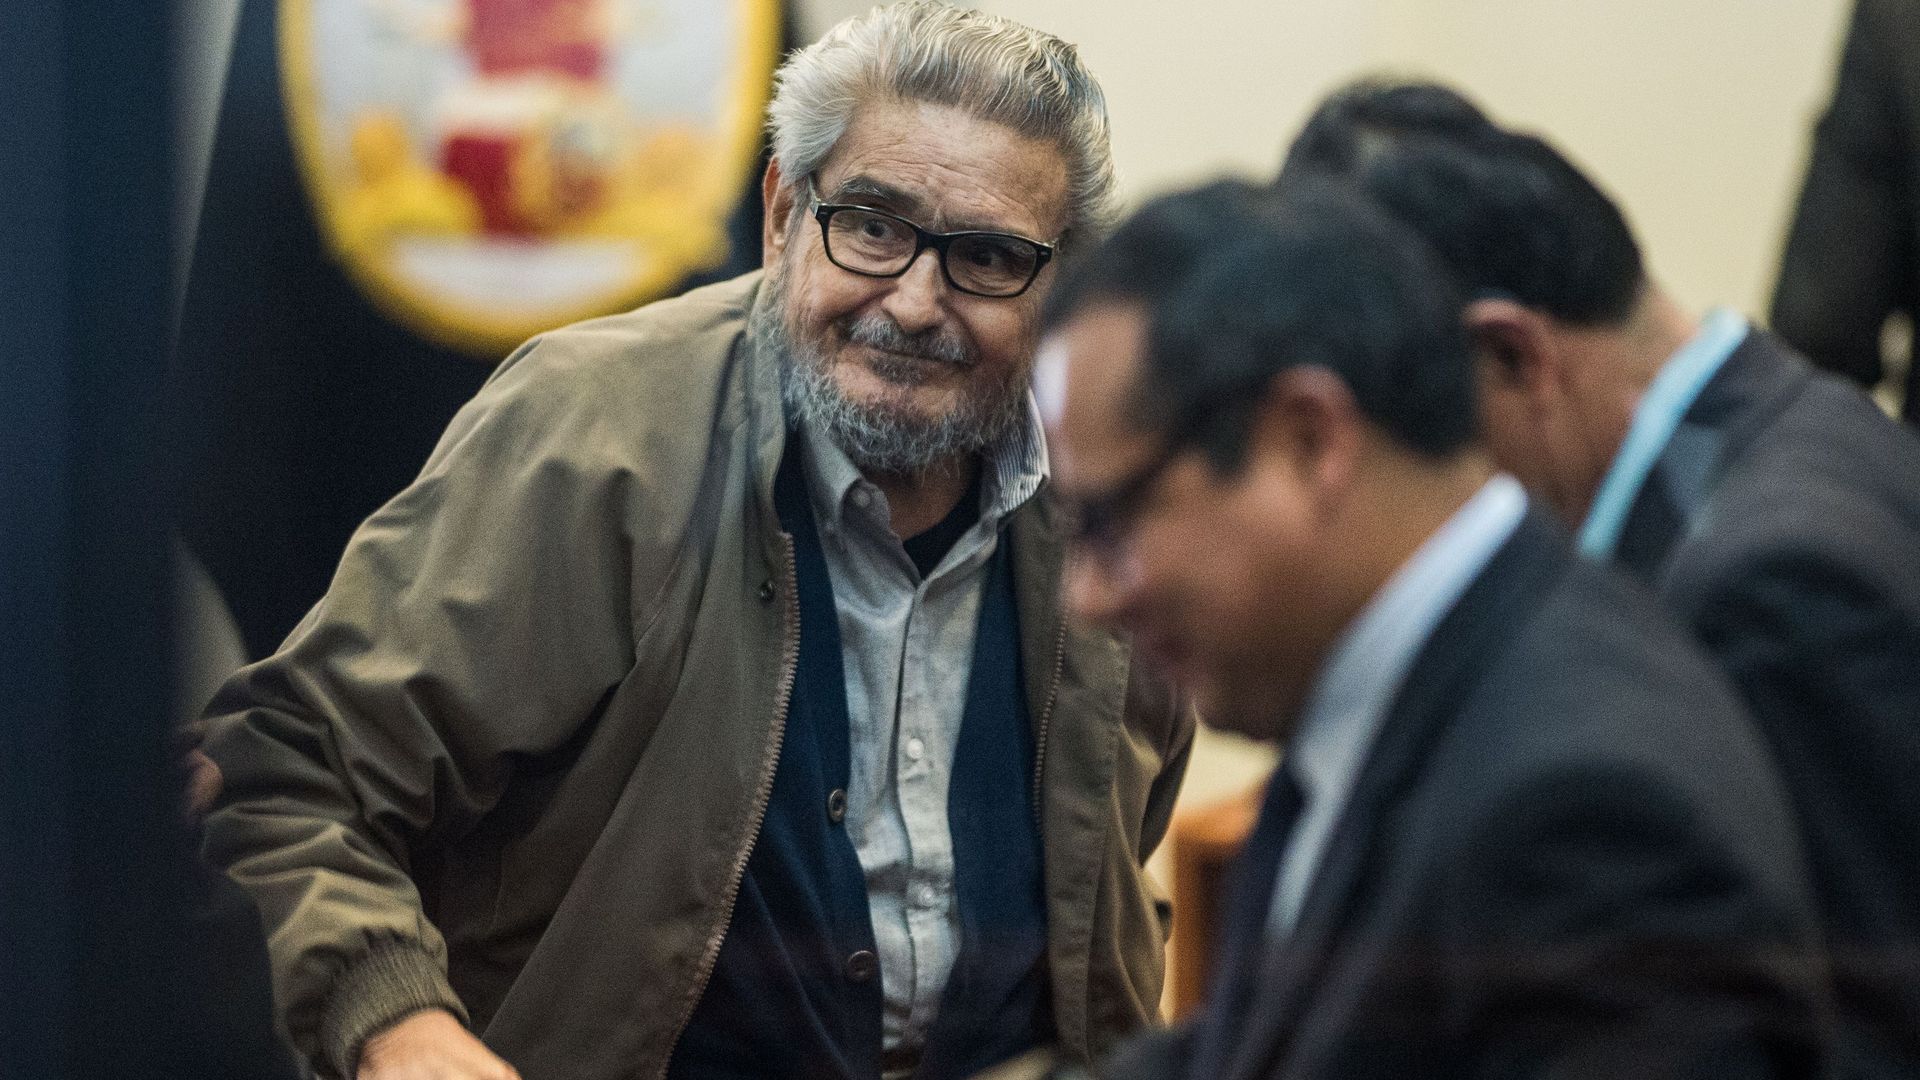 Showing Abimael Guzman (L), the imprisoned leader of the Shining Path Peruvian terrorist group, during his trial at the Navy Base in Callao, Peru, on June 27, 2017.